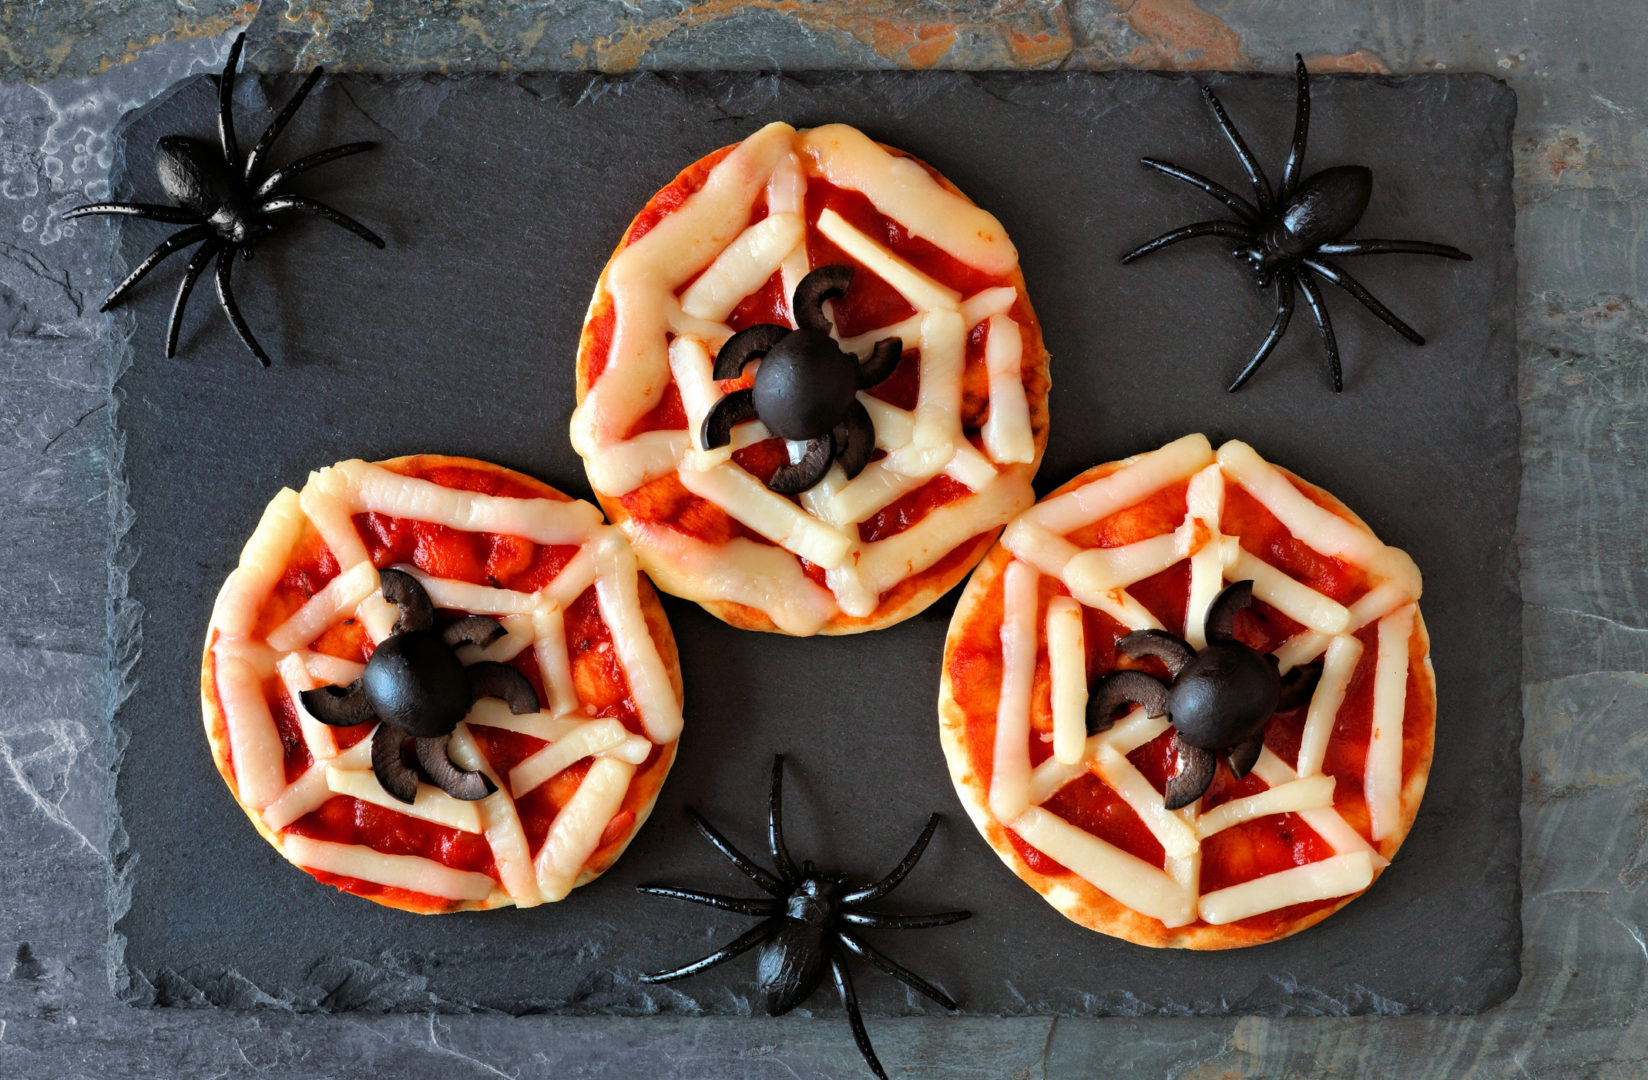 Food Decoration Ideas for the Halloween